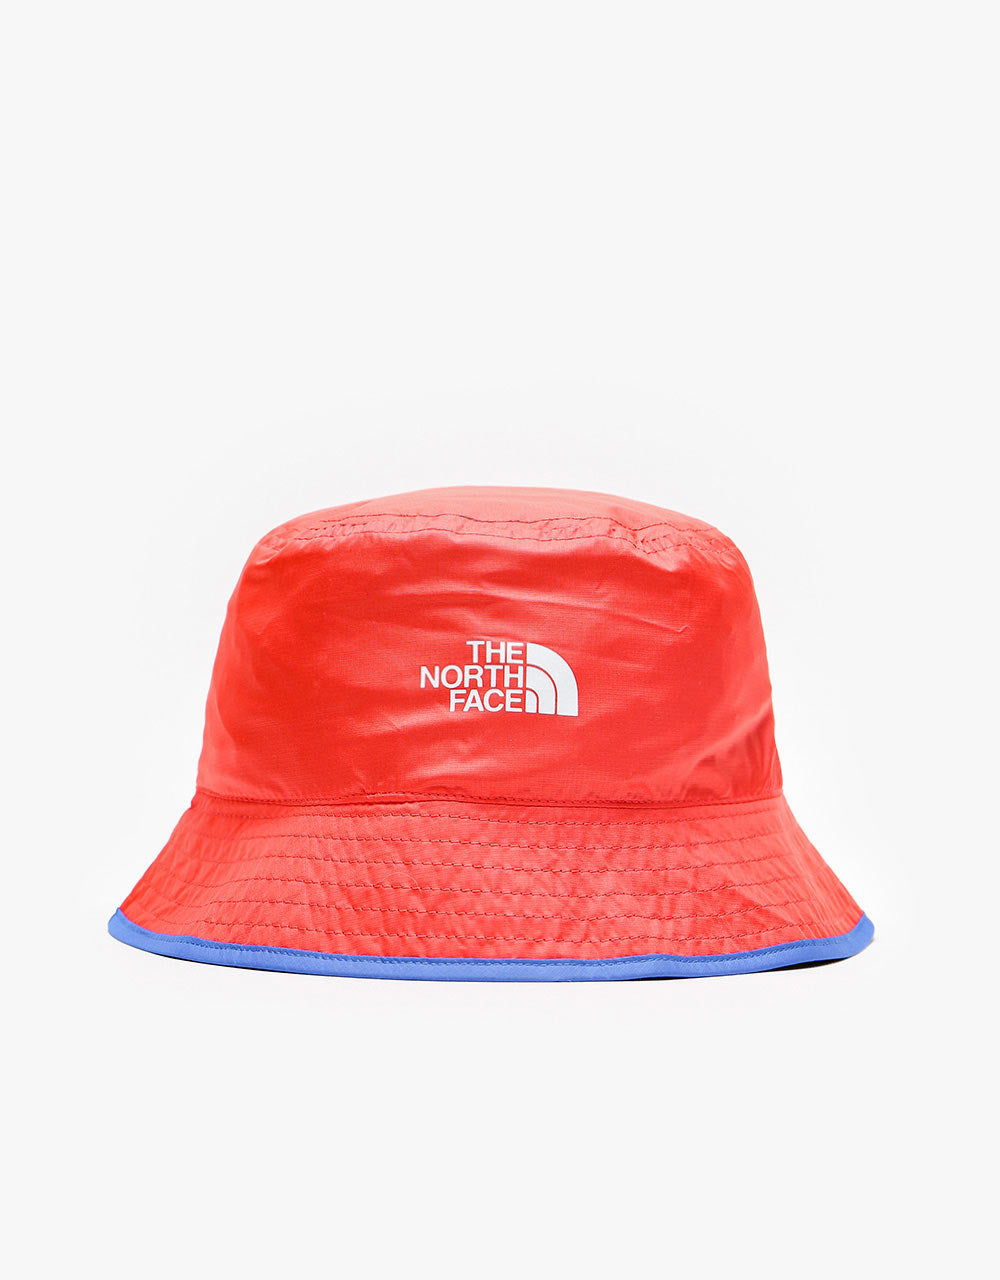 The North Face Sun Stash Bucket Hat - Horizon Red/TNF Blue – Route One